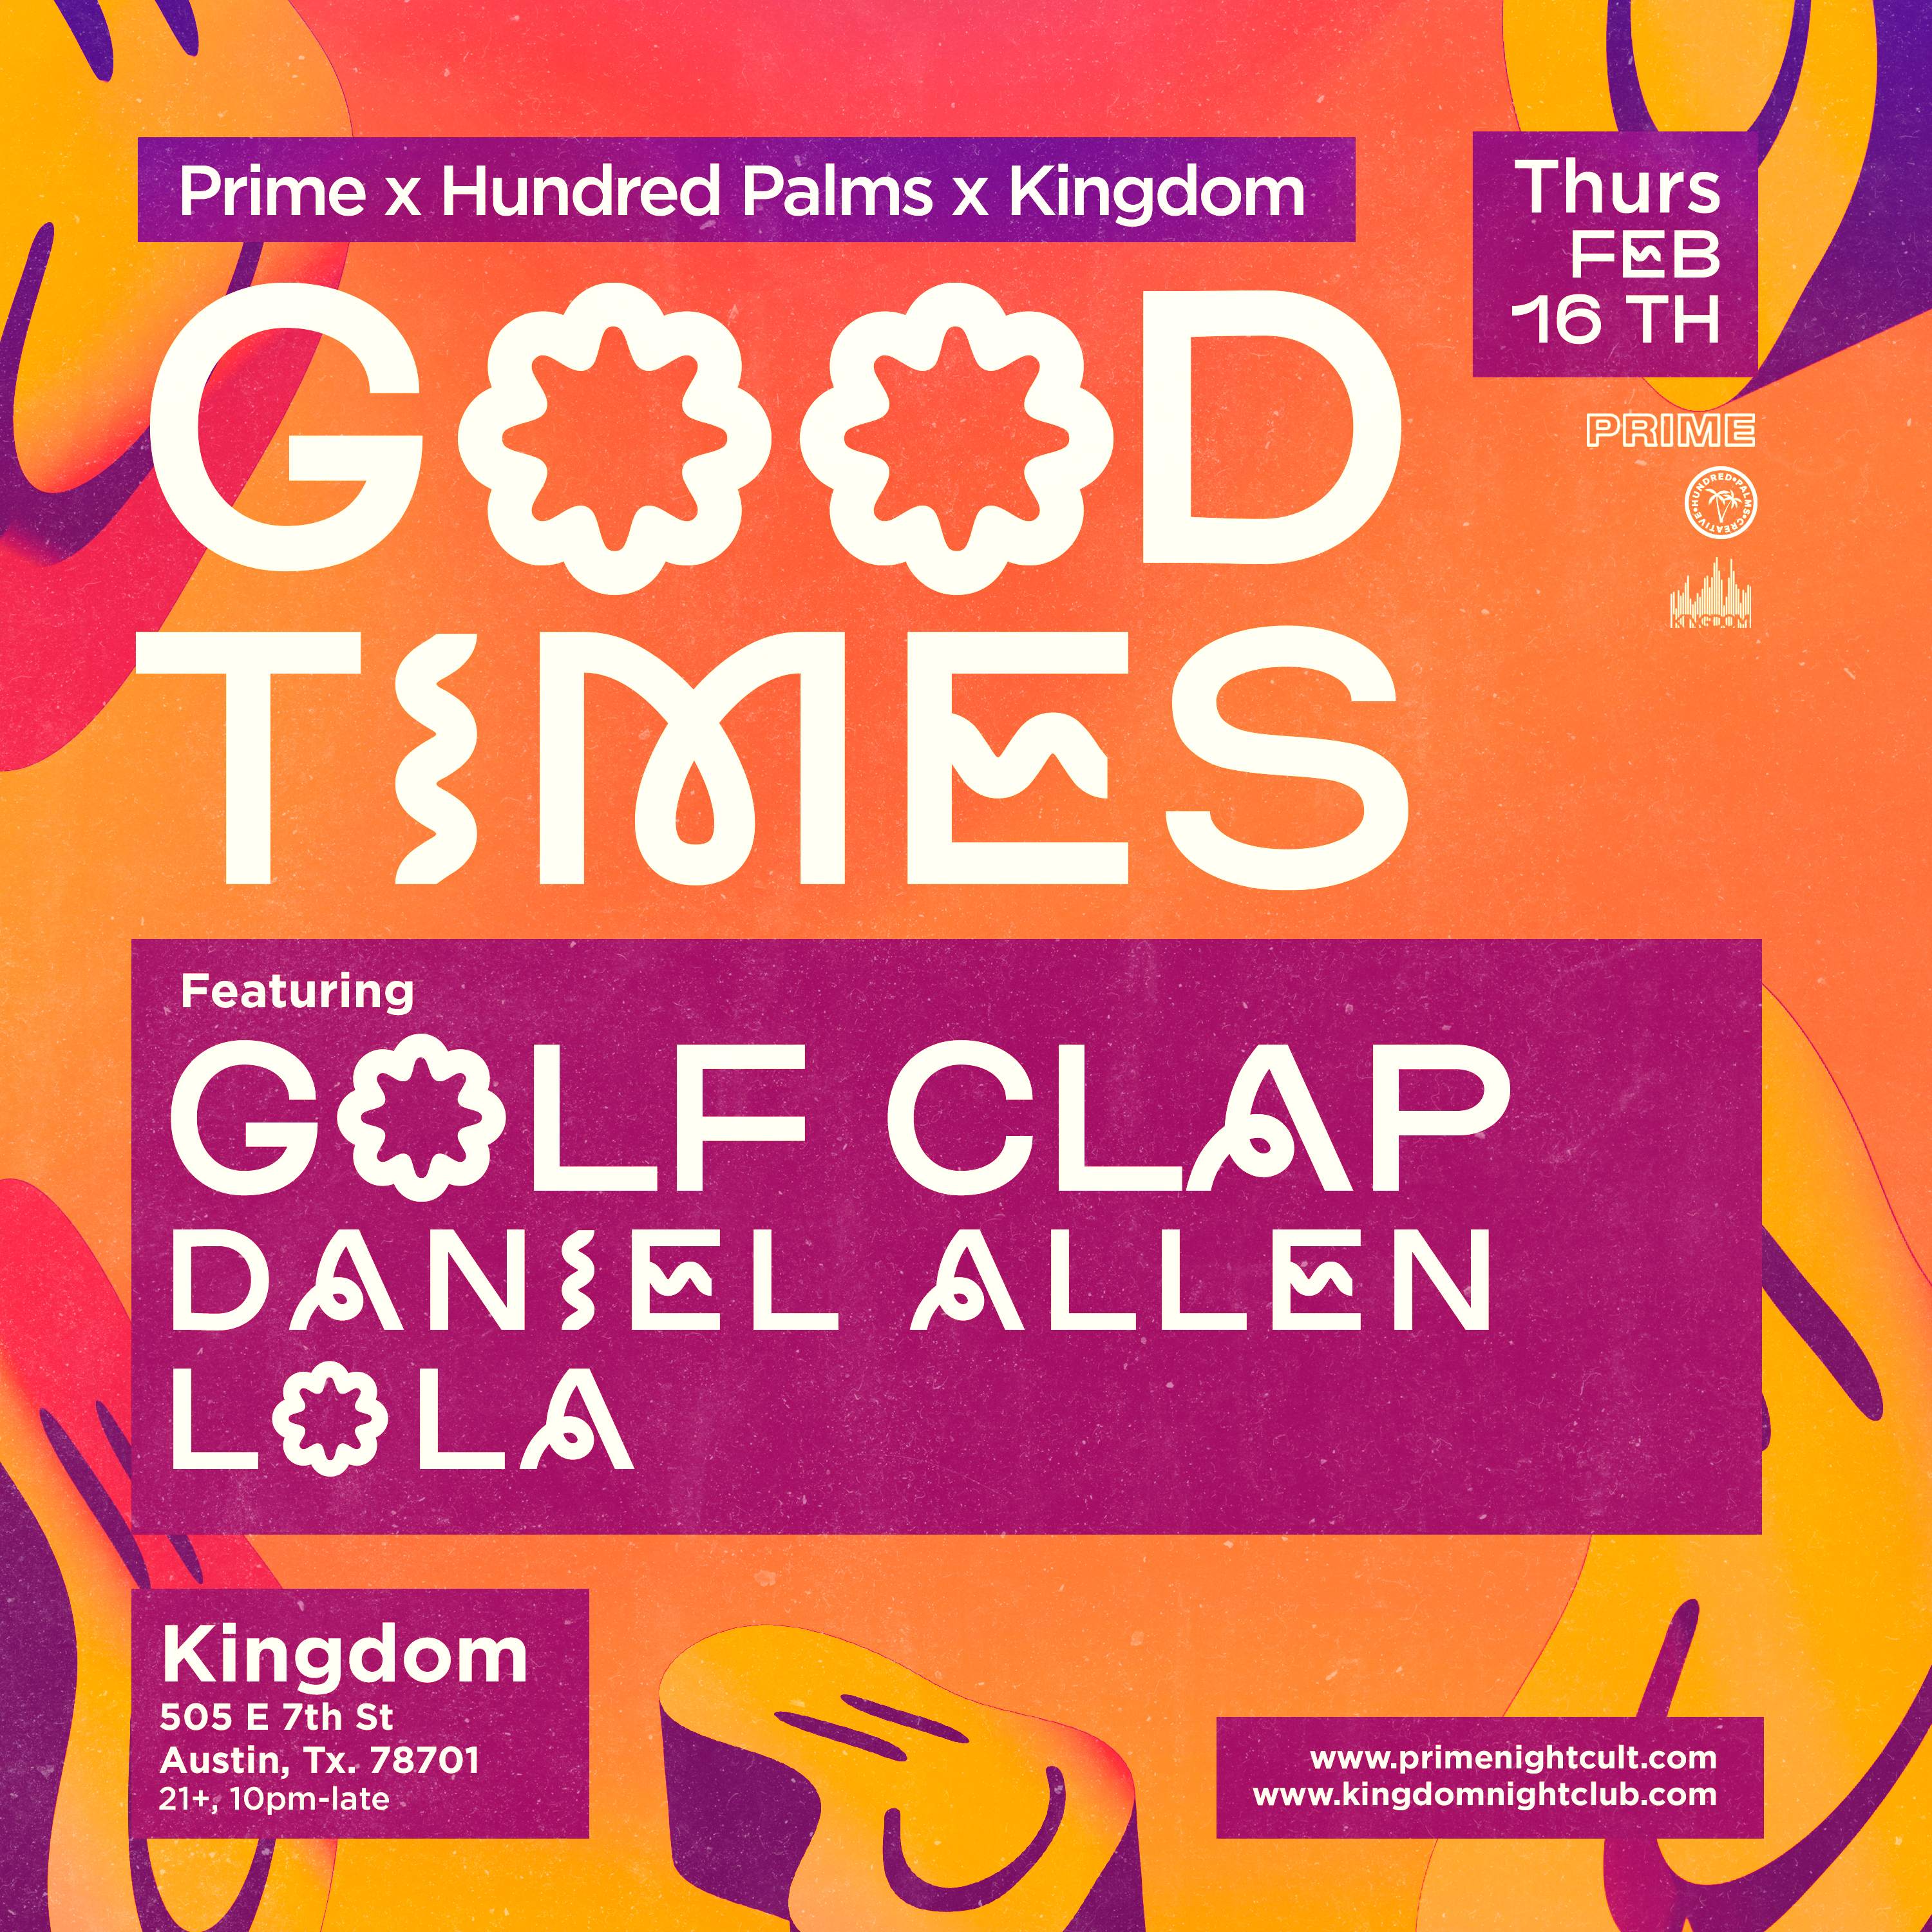 HUNDRED PALMS x PRIME: GOOD TIMES with Golf Clap: Daniel Allen: LOLA - フライヤー裏